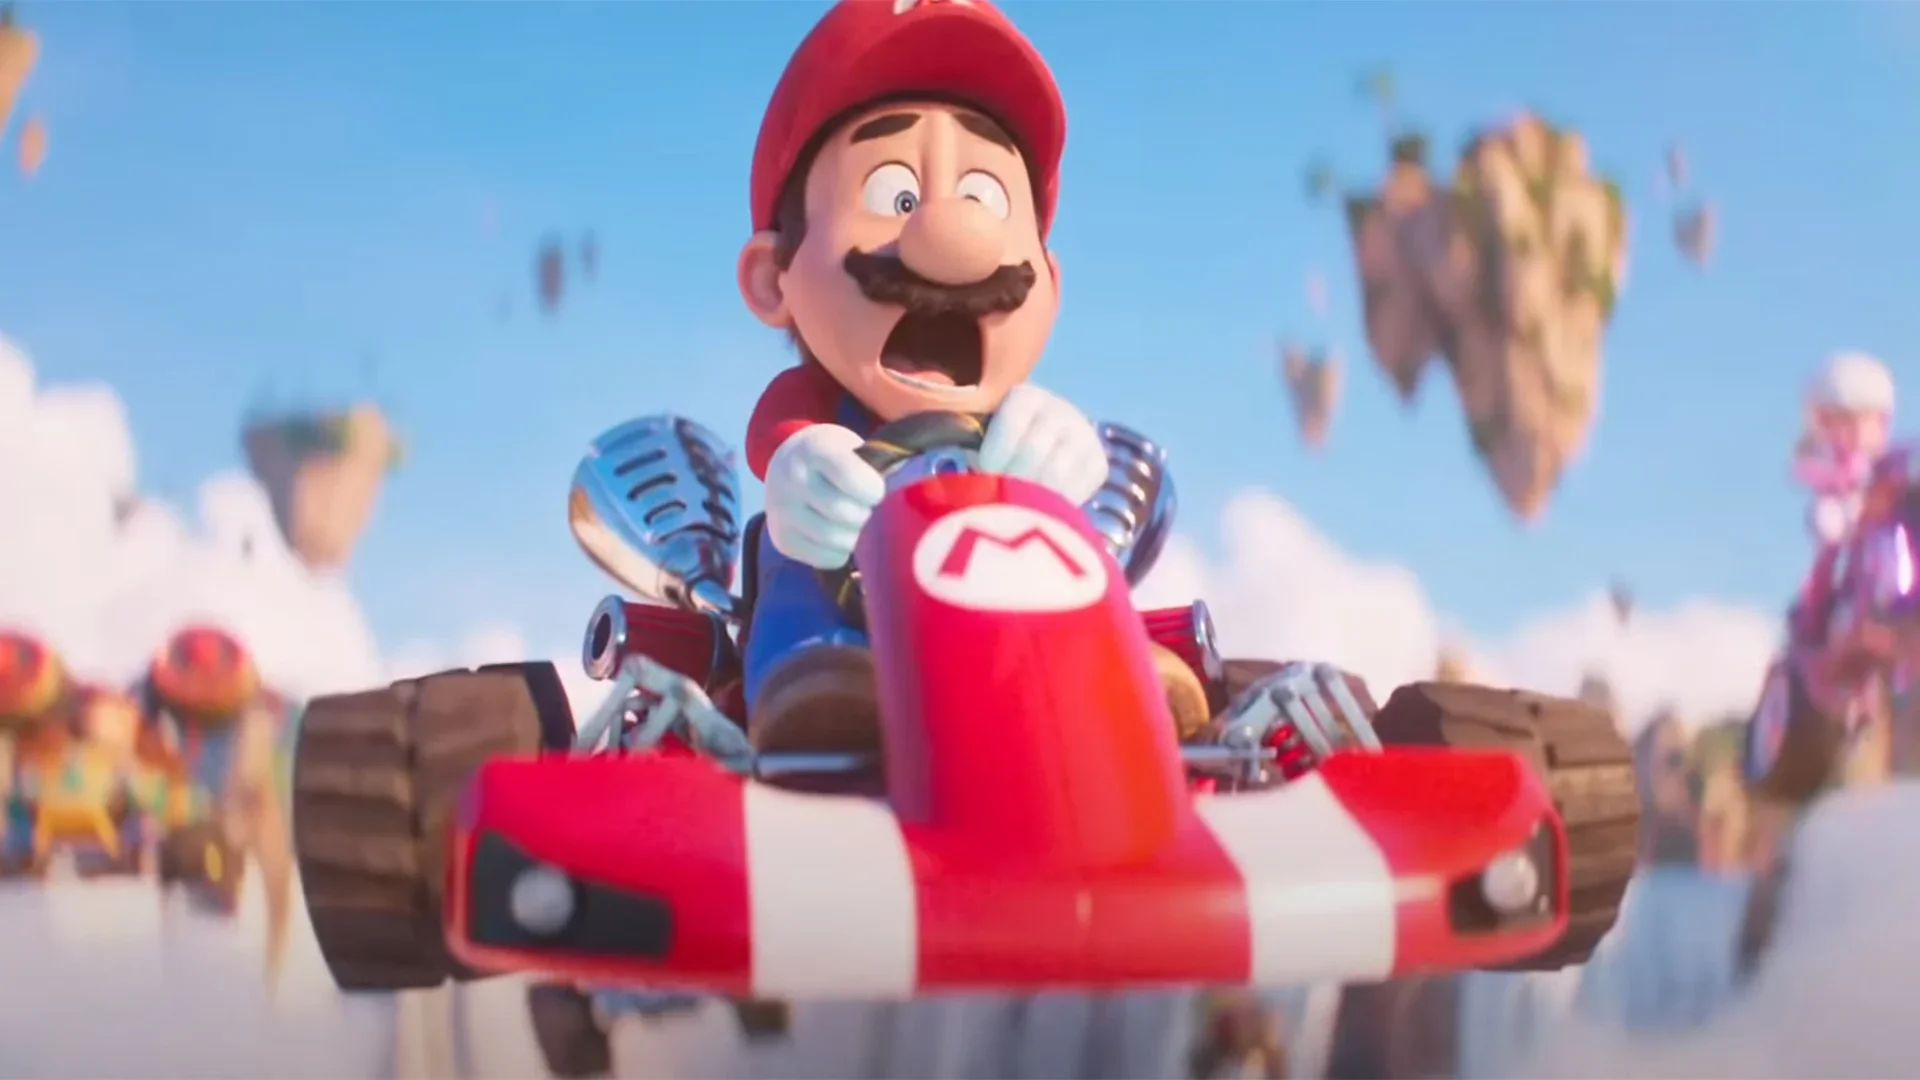 A new trailer for the film adaptation of Mario games has appeared